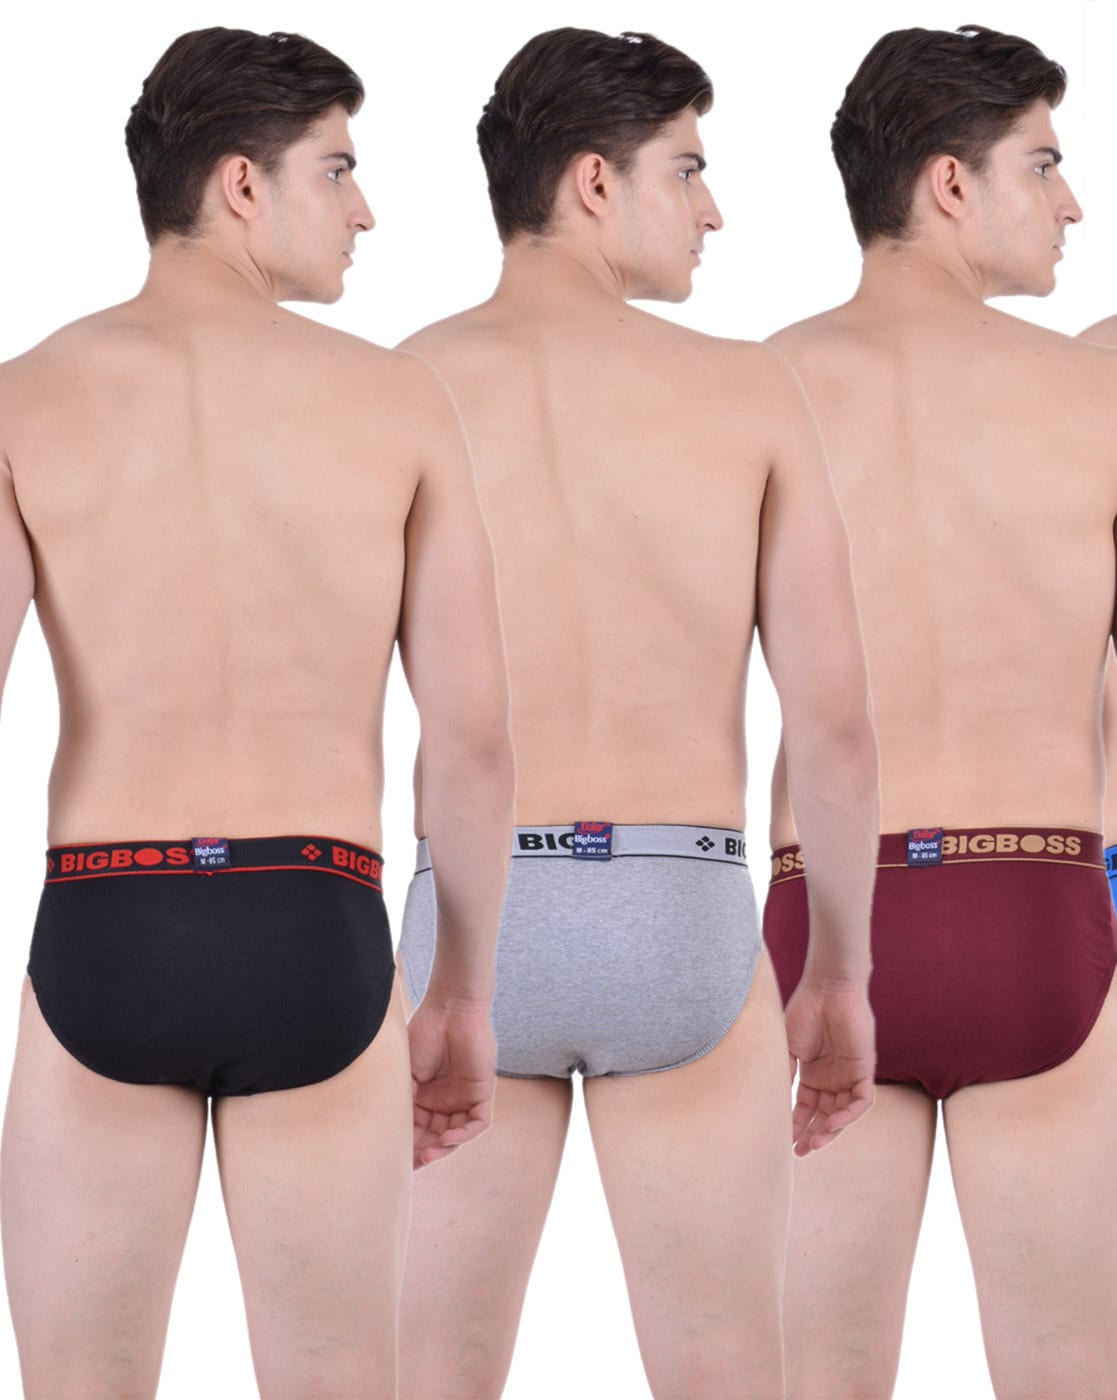 Buy Dollar Bigboss Assorted Color Cotton Briefs (Pack Of 5) for